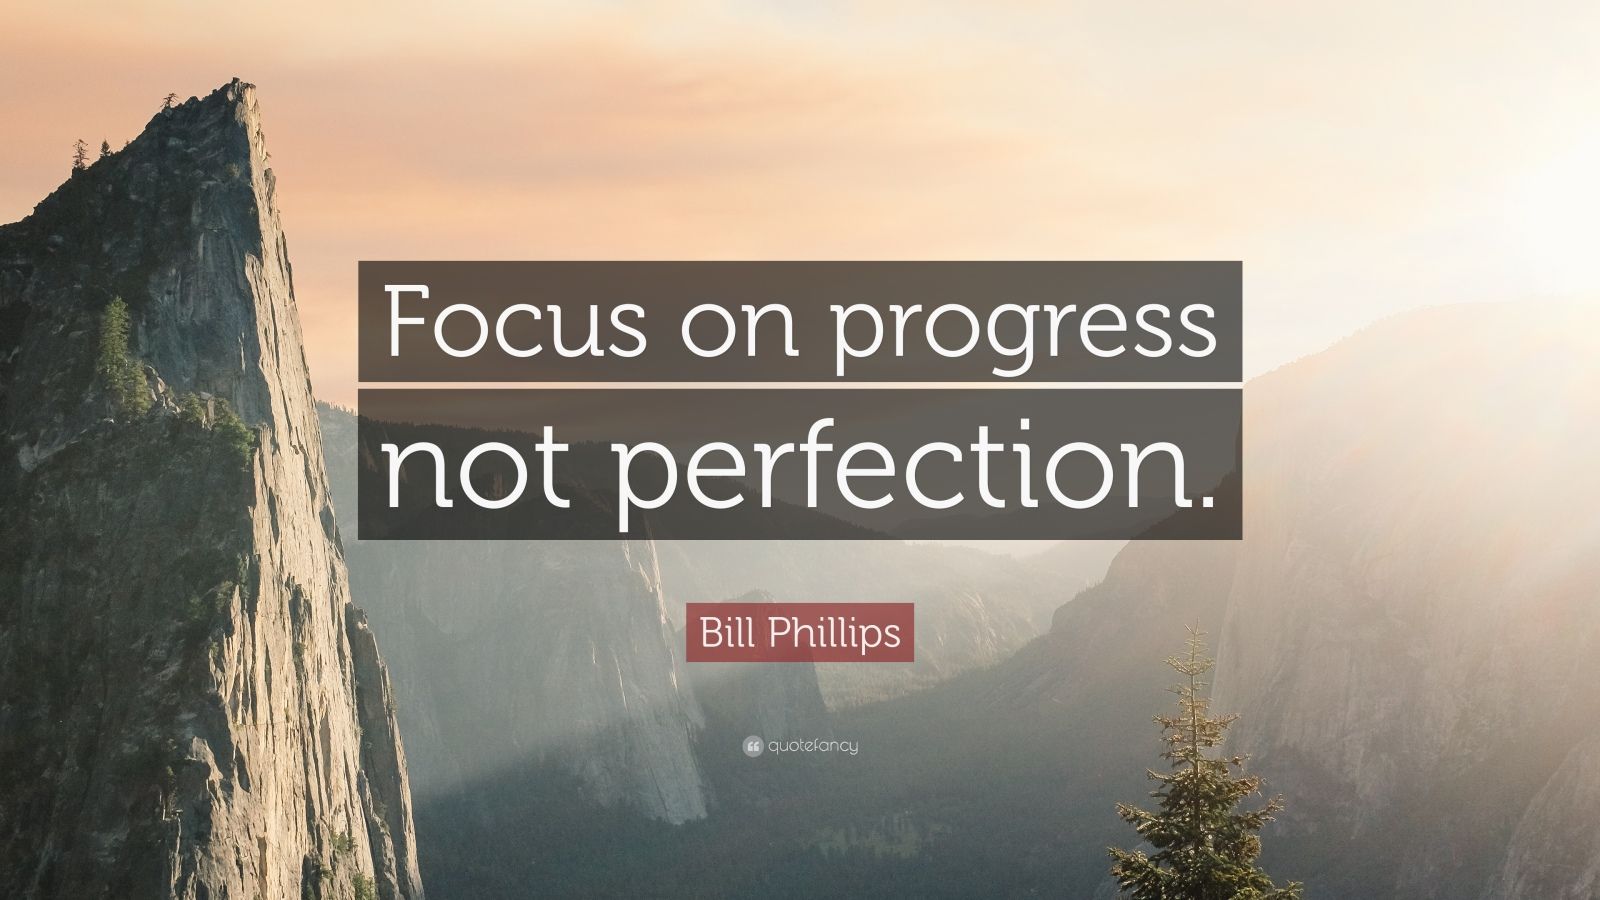 Bill Phillips Quote: “Focus on progress not perfection.”